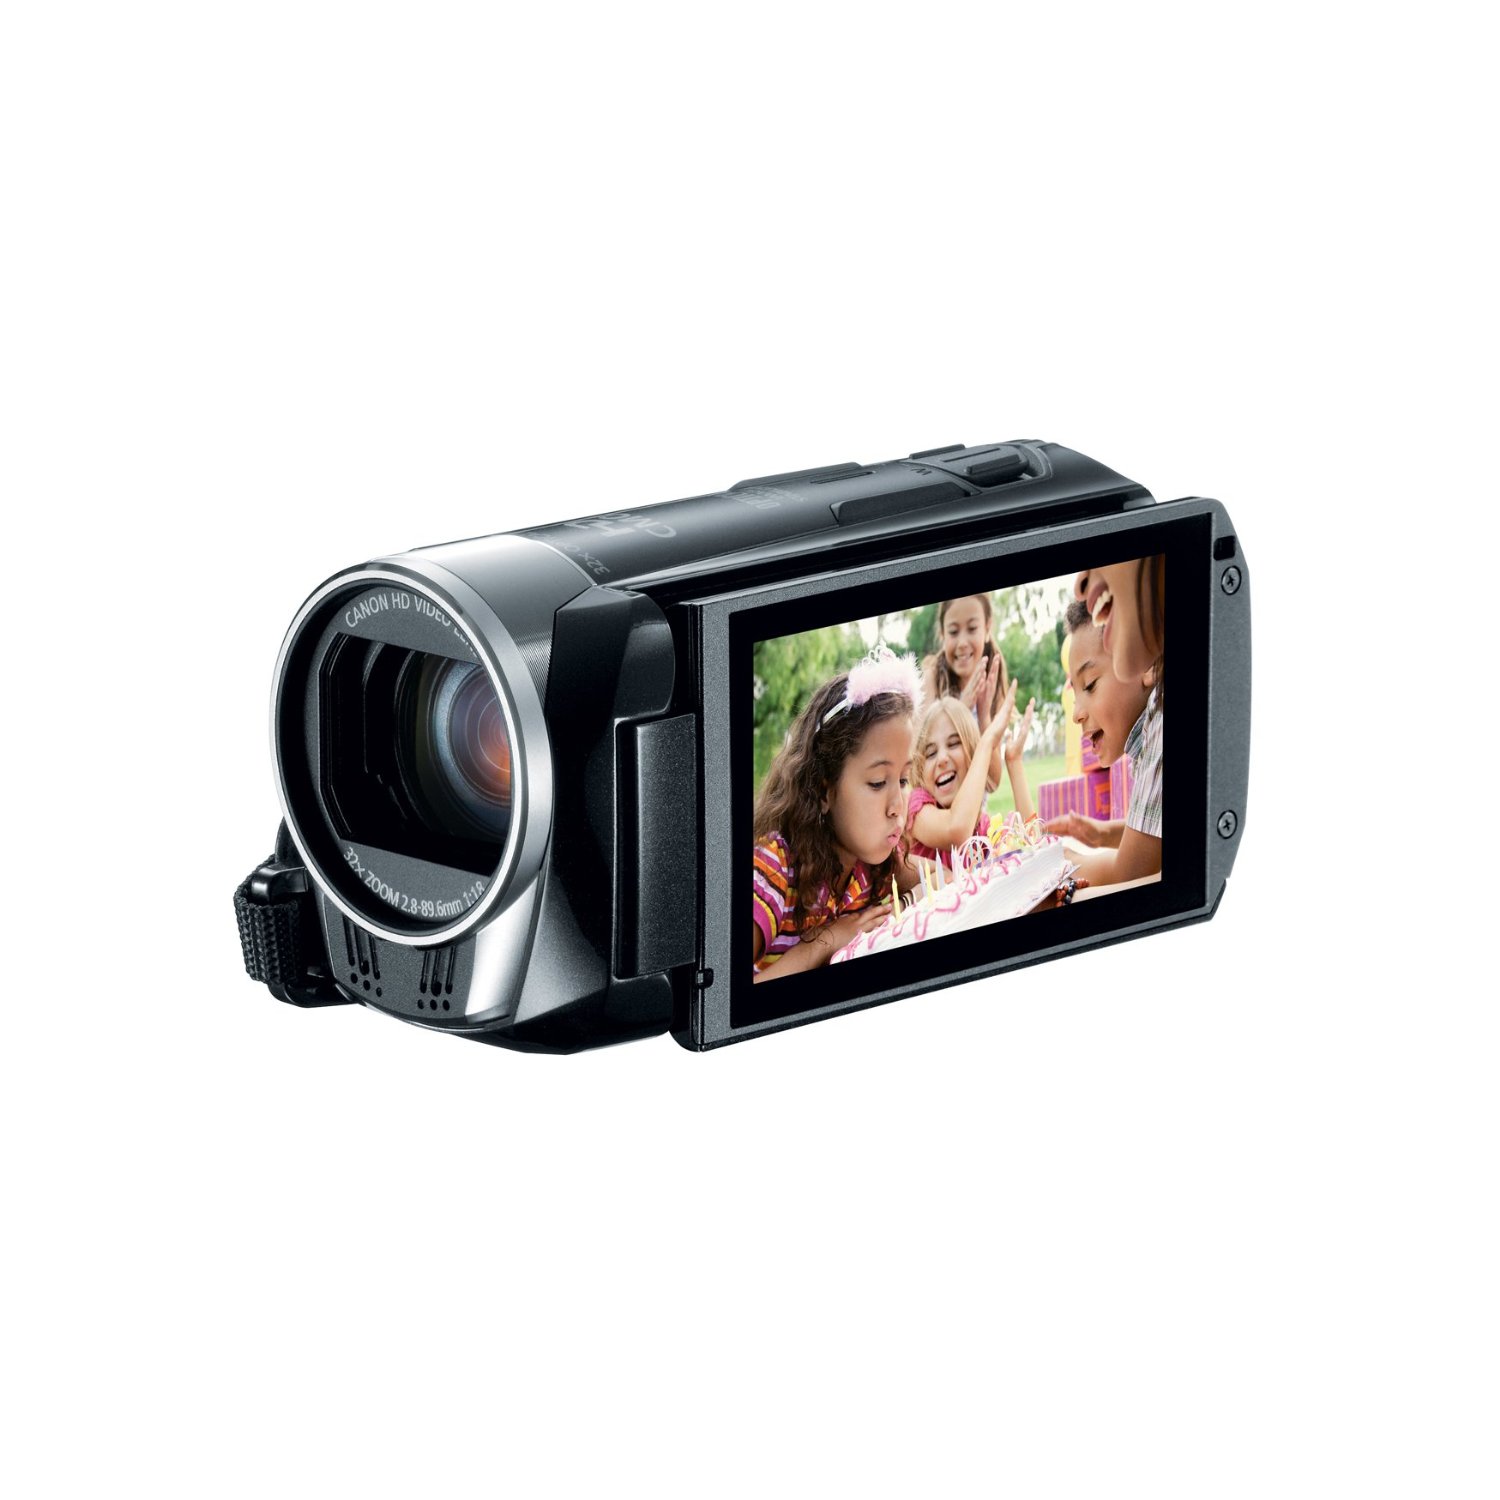 http://thetechjournal.com/wp-content/uploads/images/1202/1328098403-canon-vixia-hf-r300-full-hd-51x-image-stabilized-optical-zoom-camcorder-7.jpg